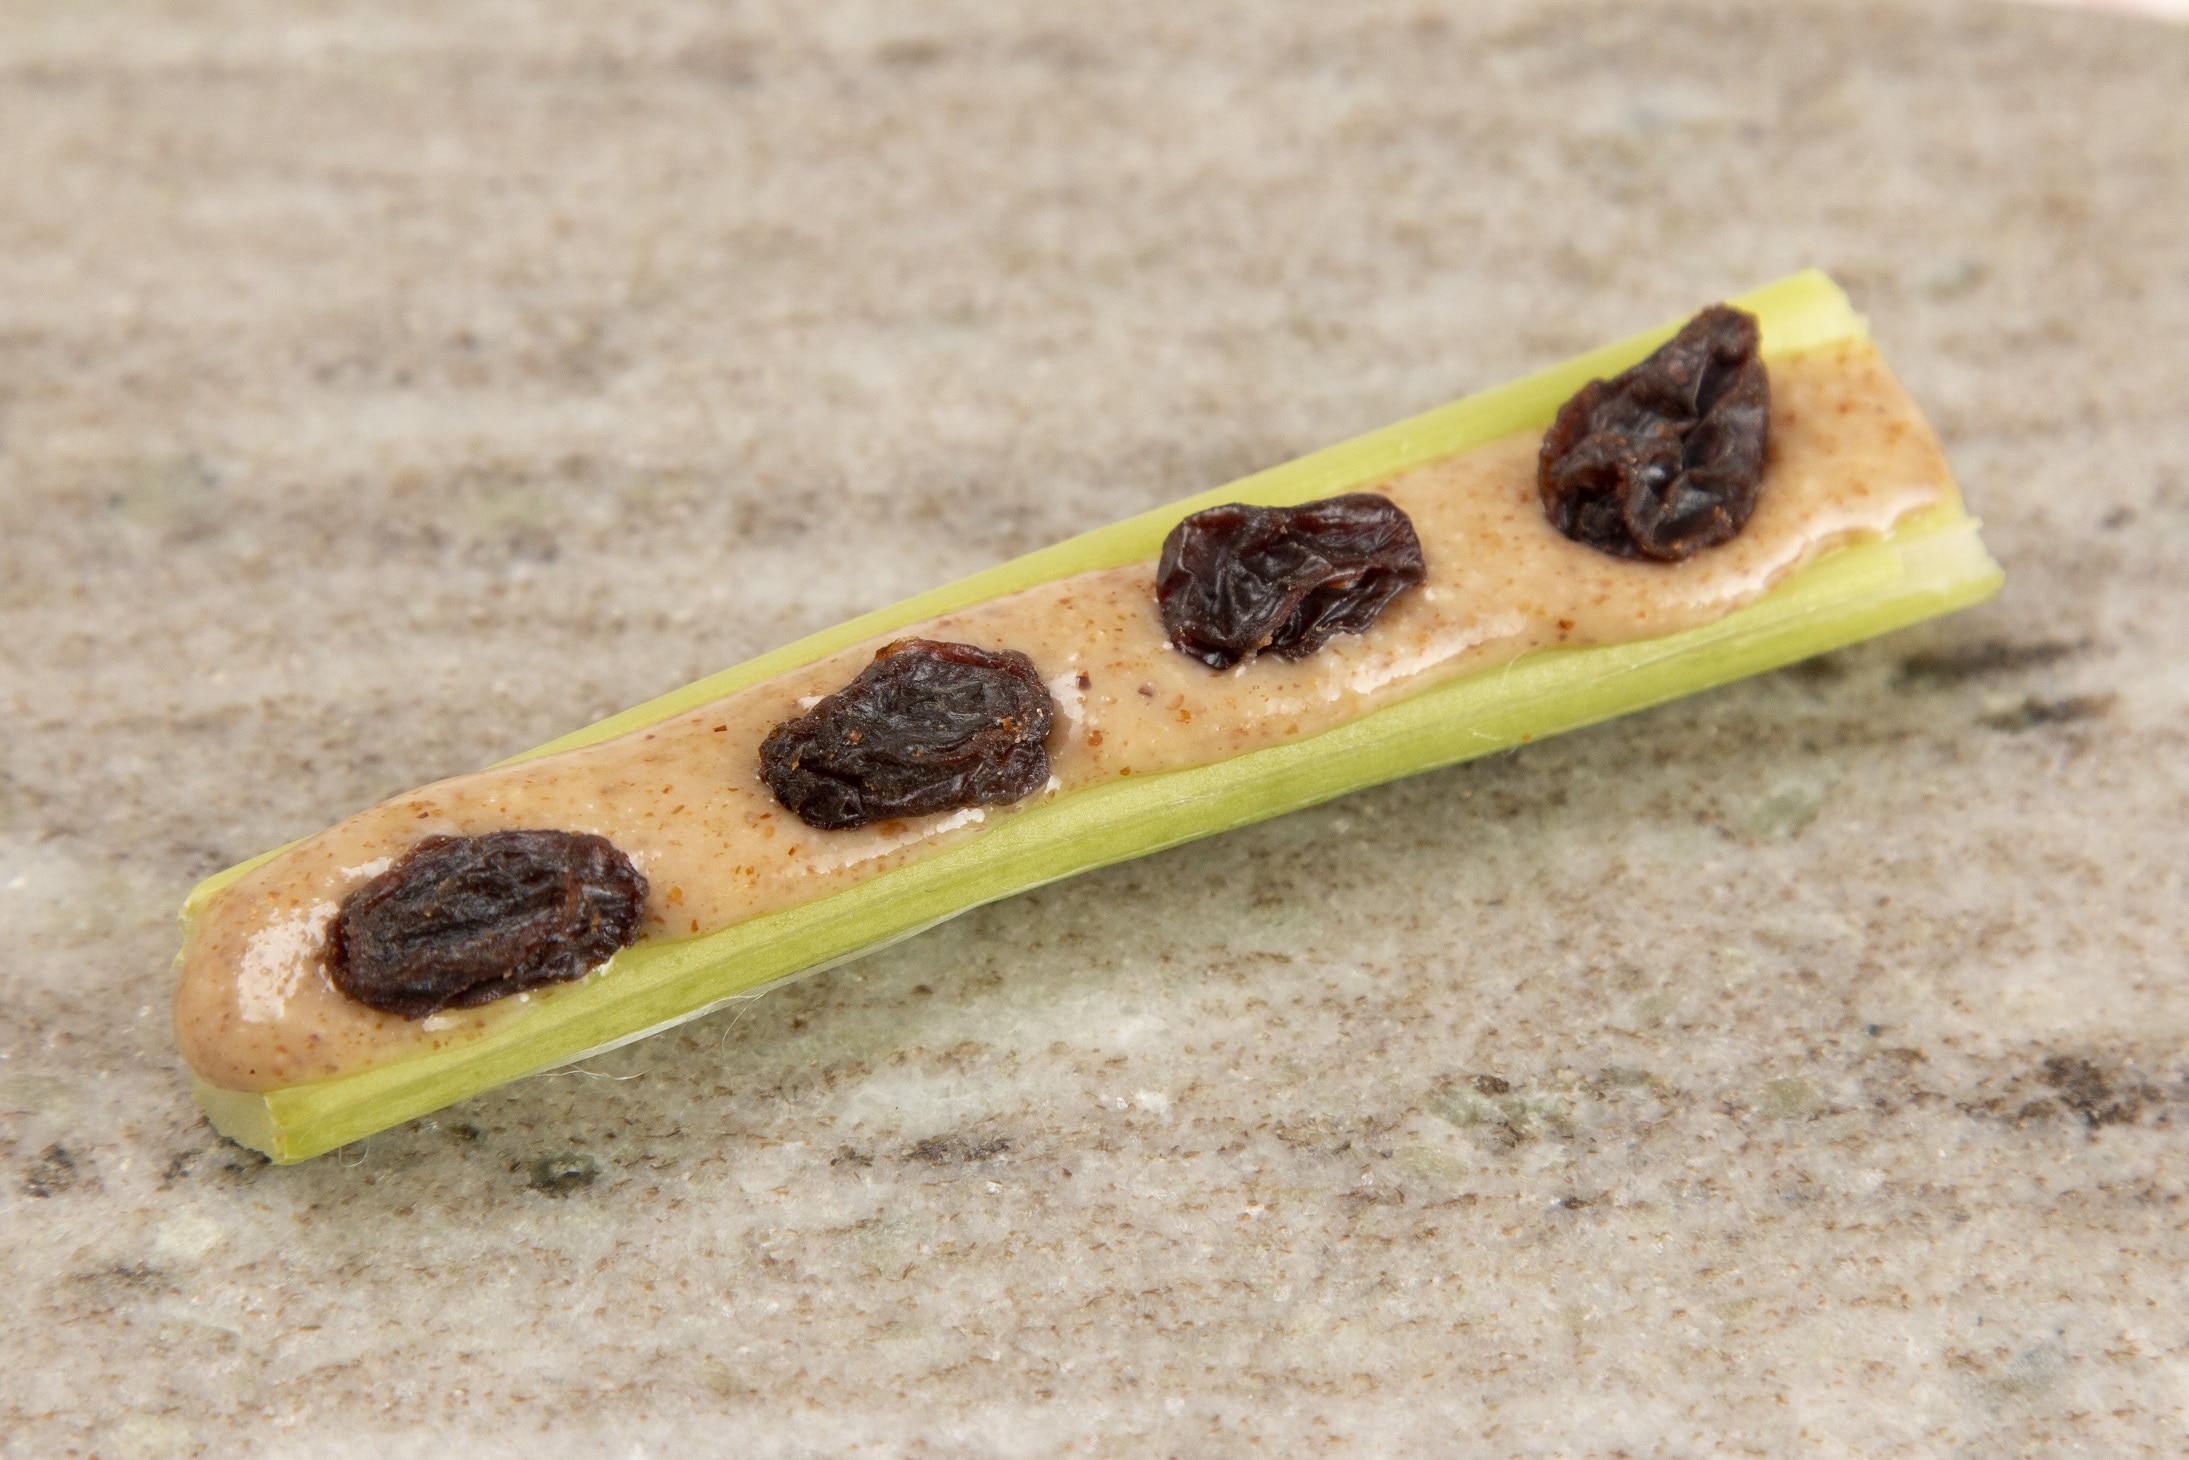 Ants on a Log and Other Fun Kid Snacks for your Small Anteaters